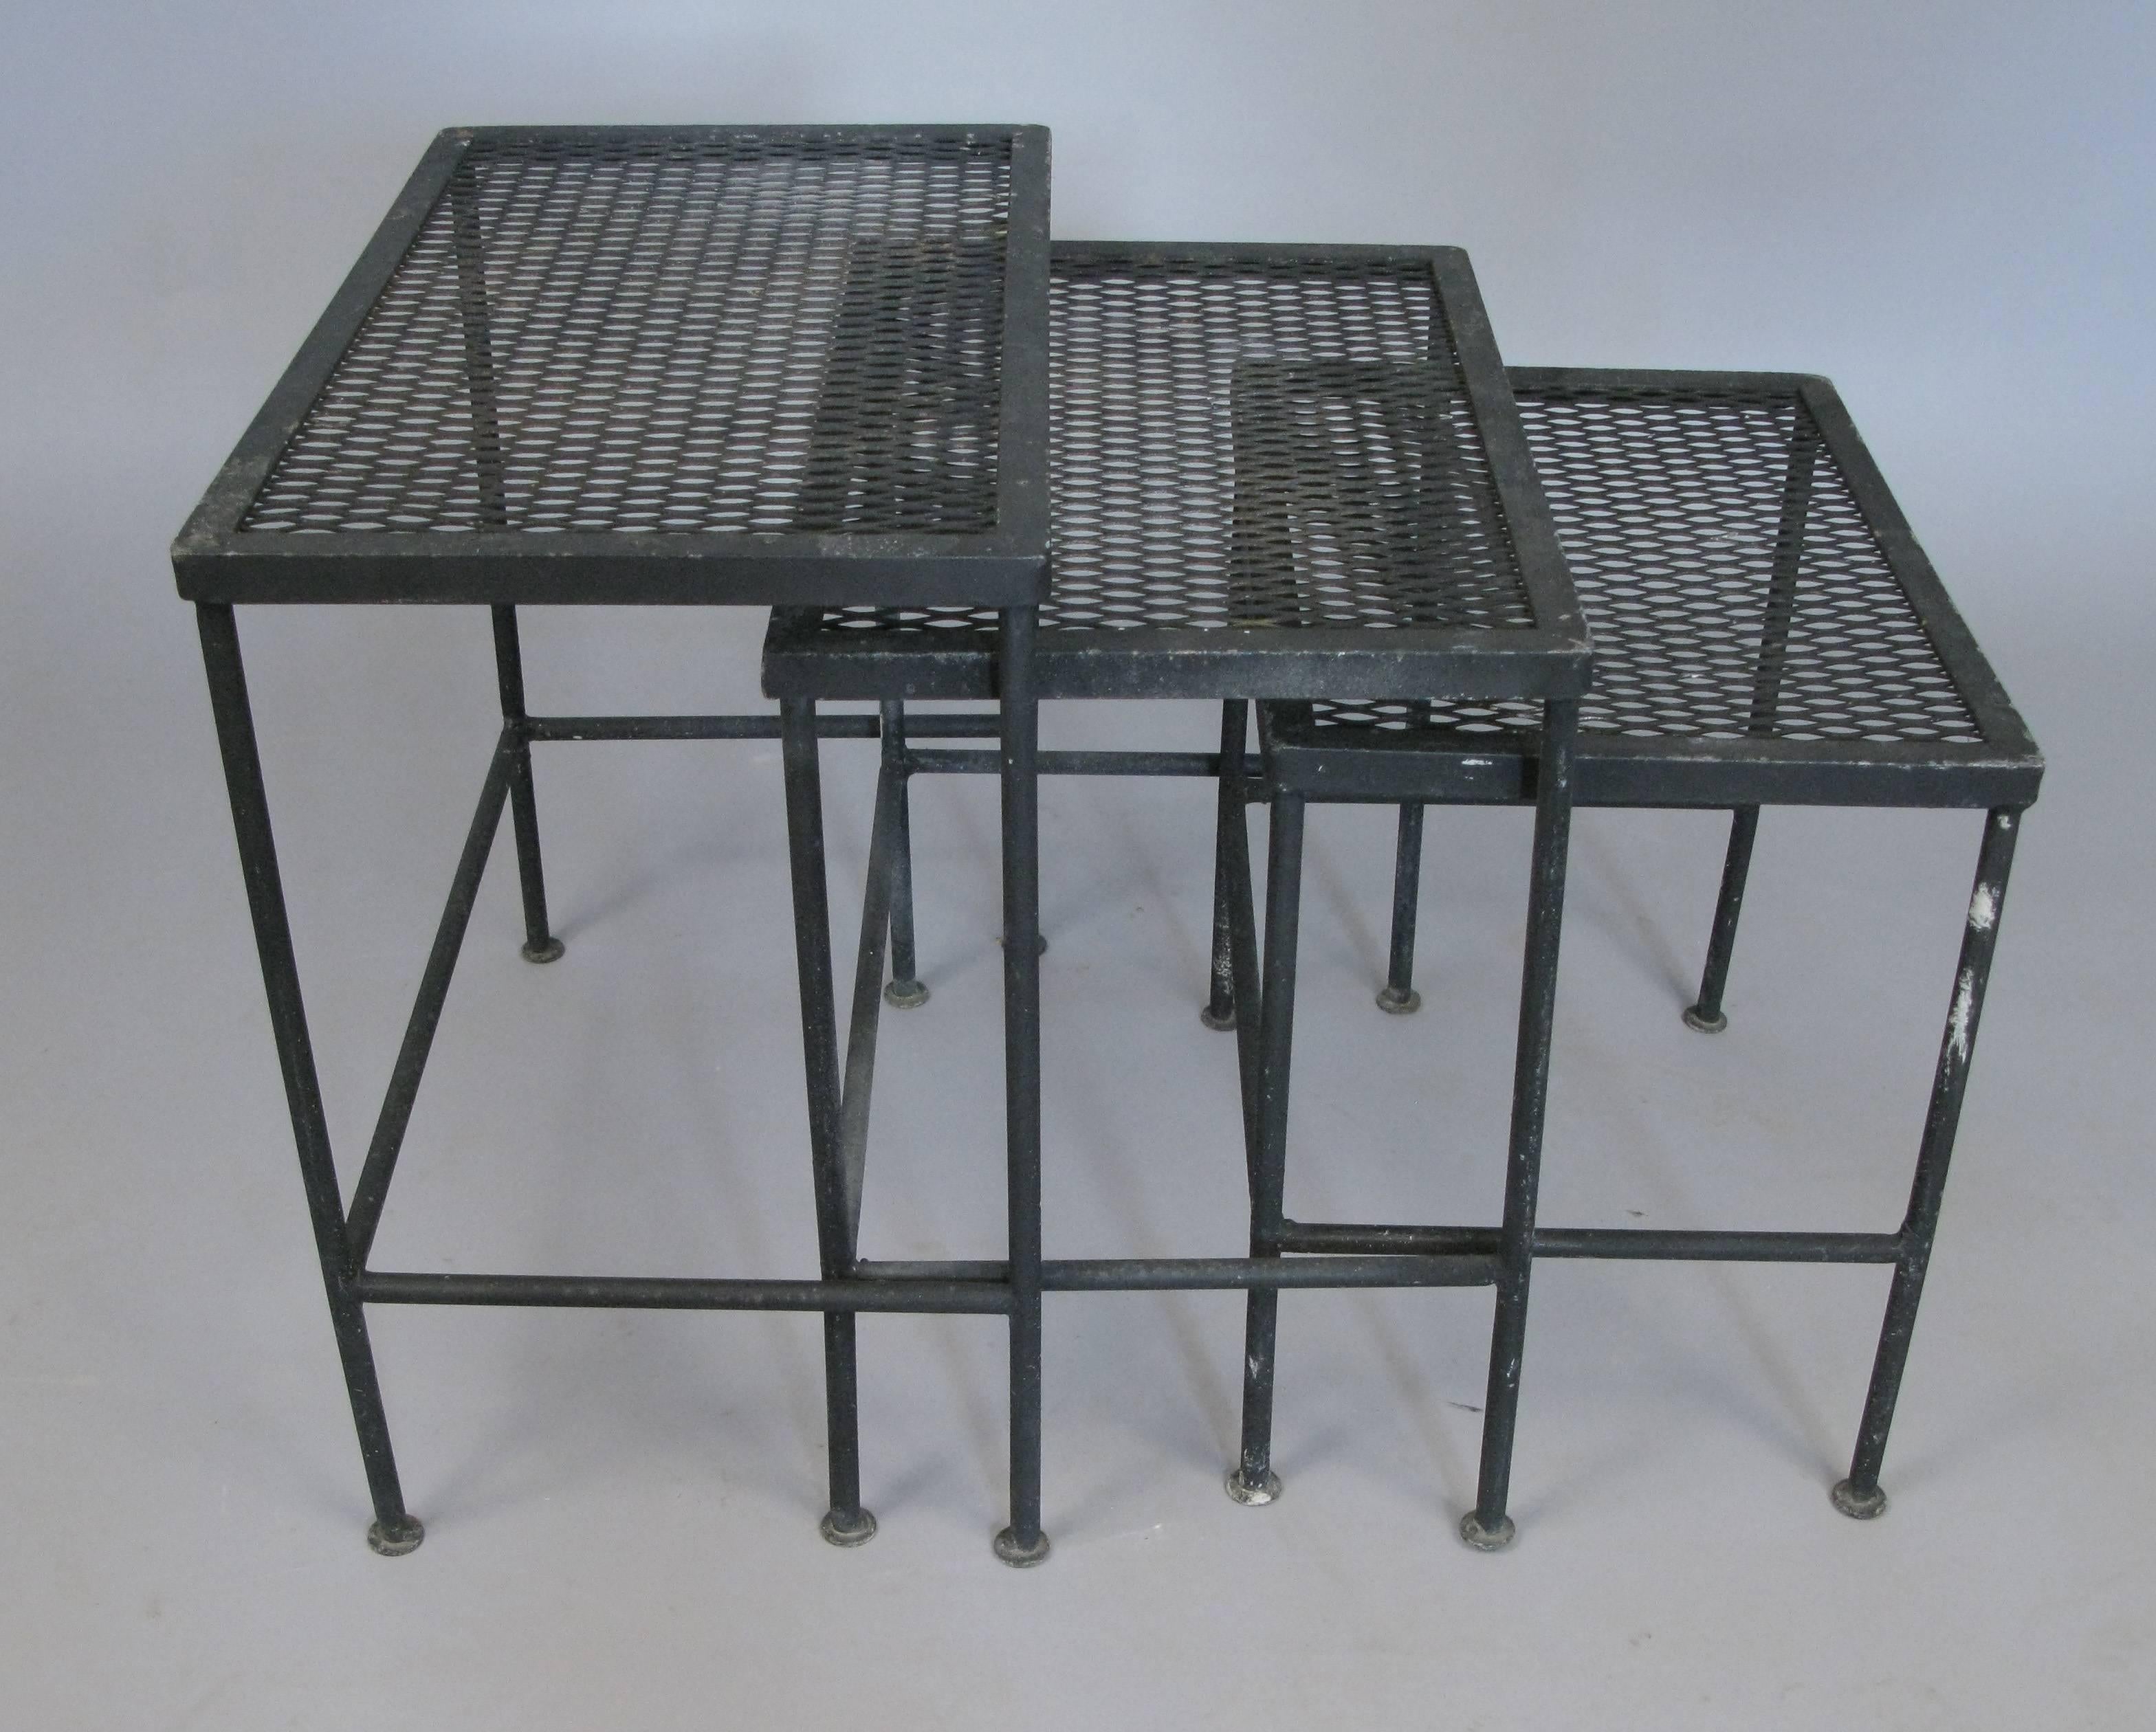 A rare set of vintage 1950s wrought iron nesting tables by Woodard, rectangular in form with steel mesh tops and wrought iron stretchers. Very good original condition.